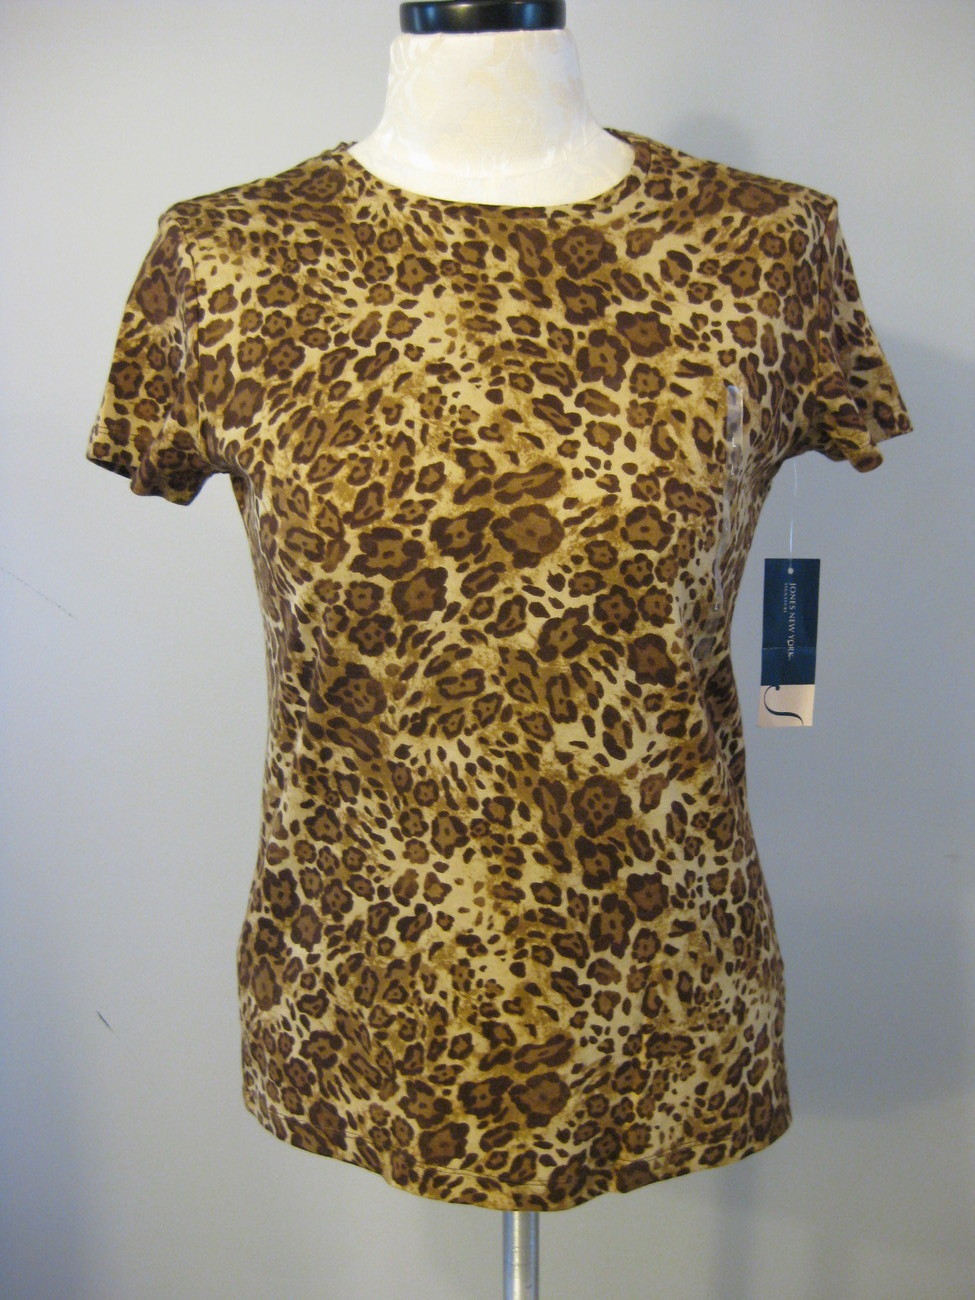 Jones New York Signature Collection Leopard Top Size L NWT - Tops & Blouses